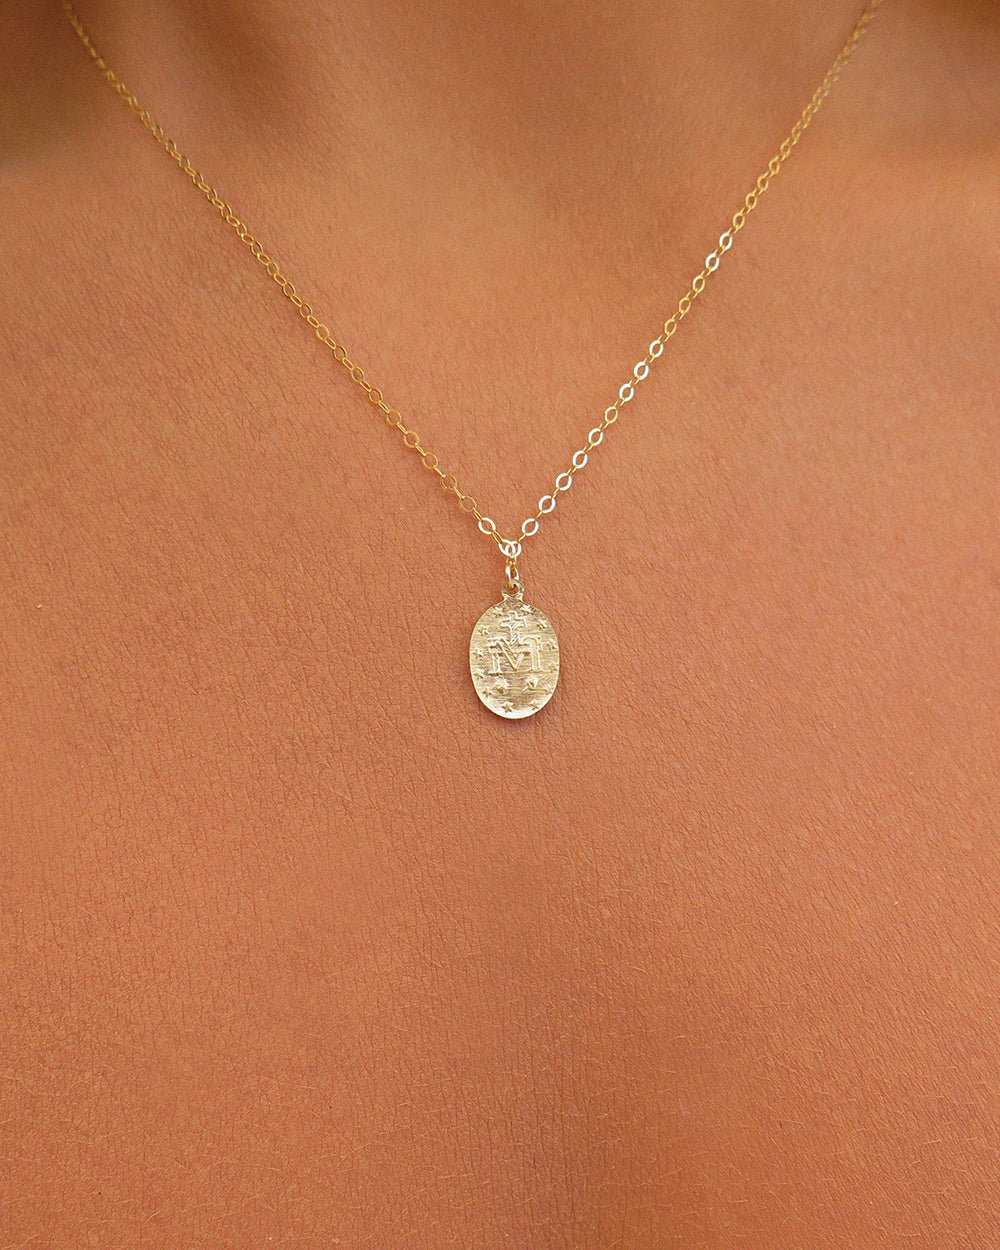 Load image into Gallery viewer, SMALL MIRACULOUS MEDAL NECKLACE- 14k Yellow Gold - The Littl - Deluxe Chain - 37cm (choker) Necklaces
